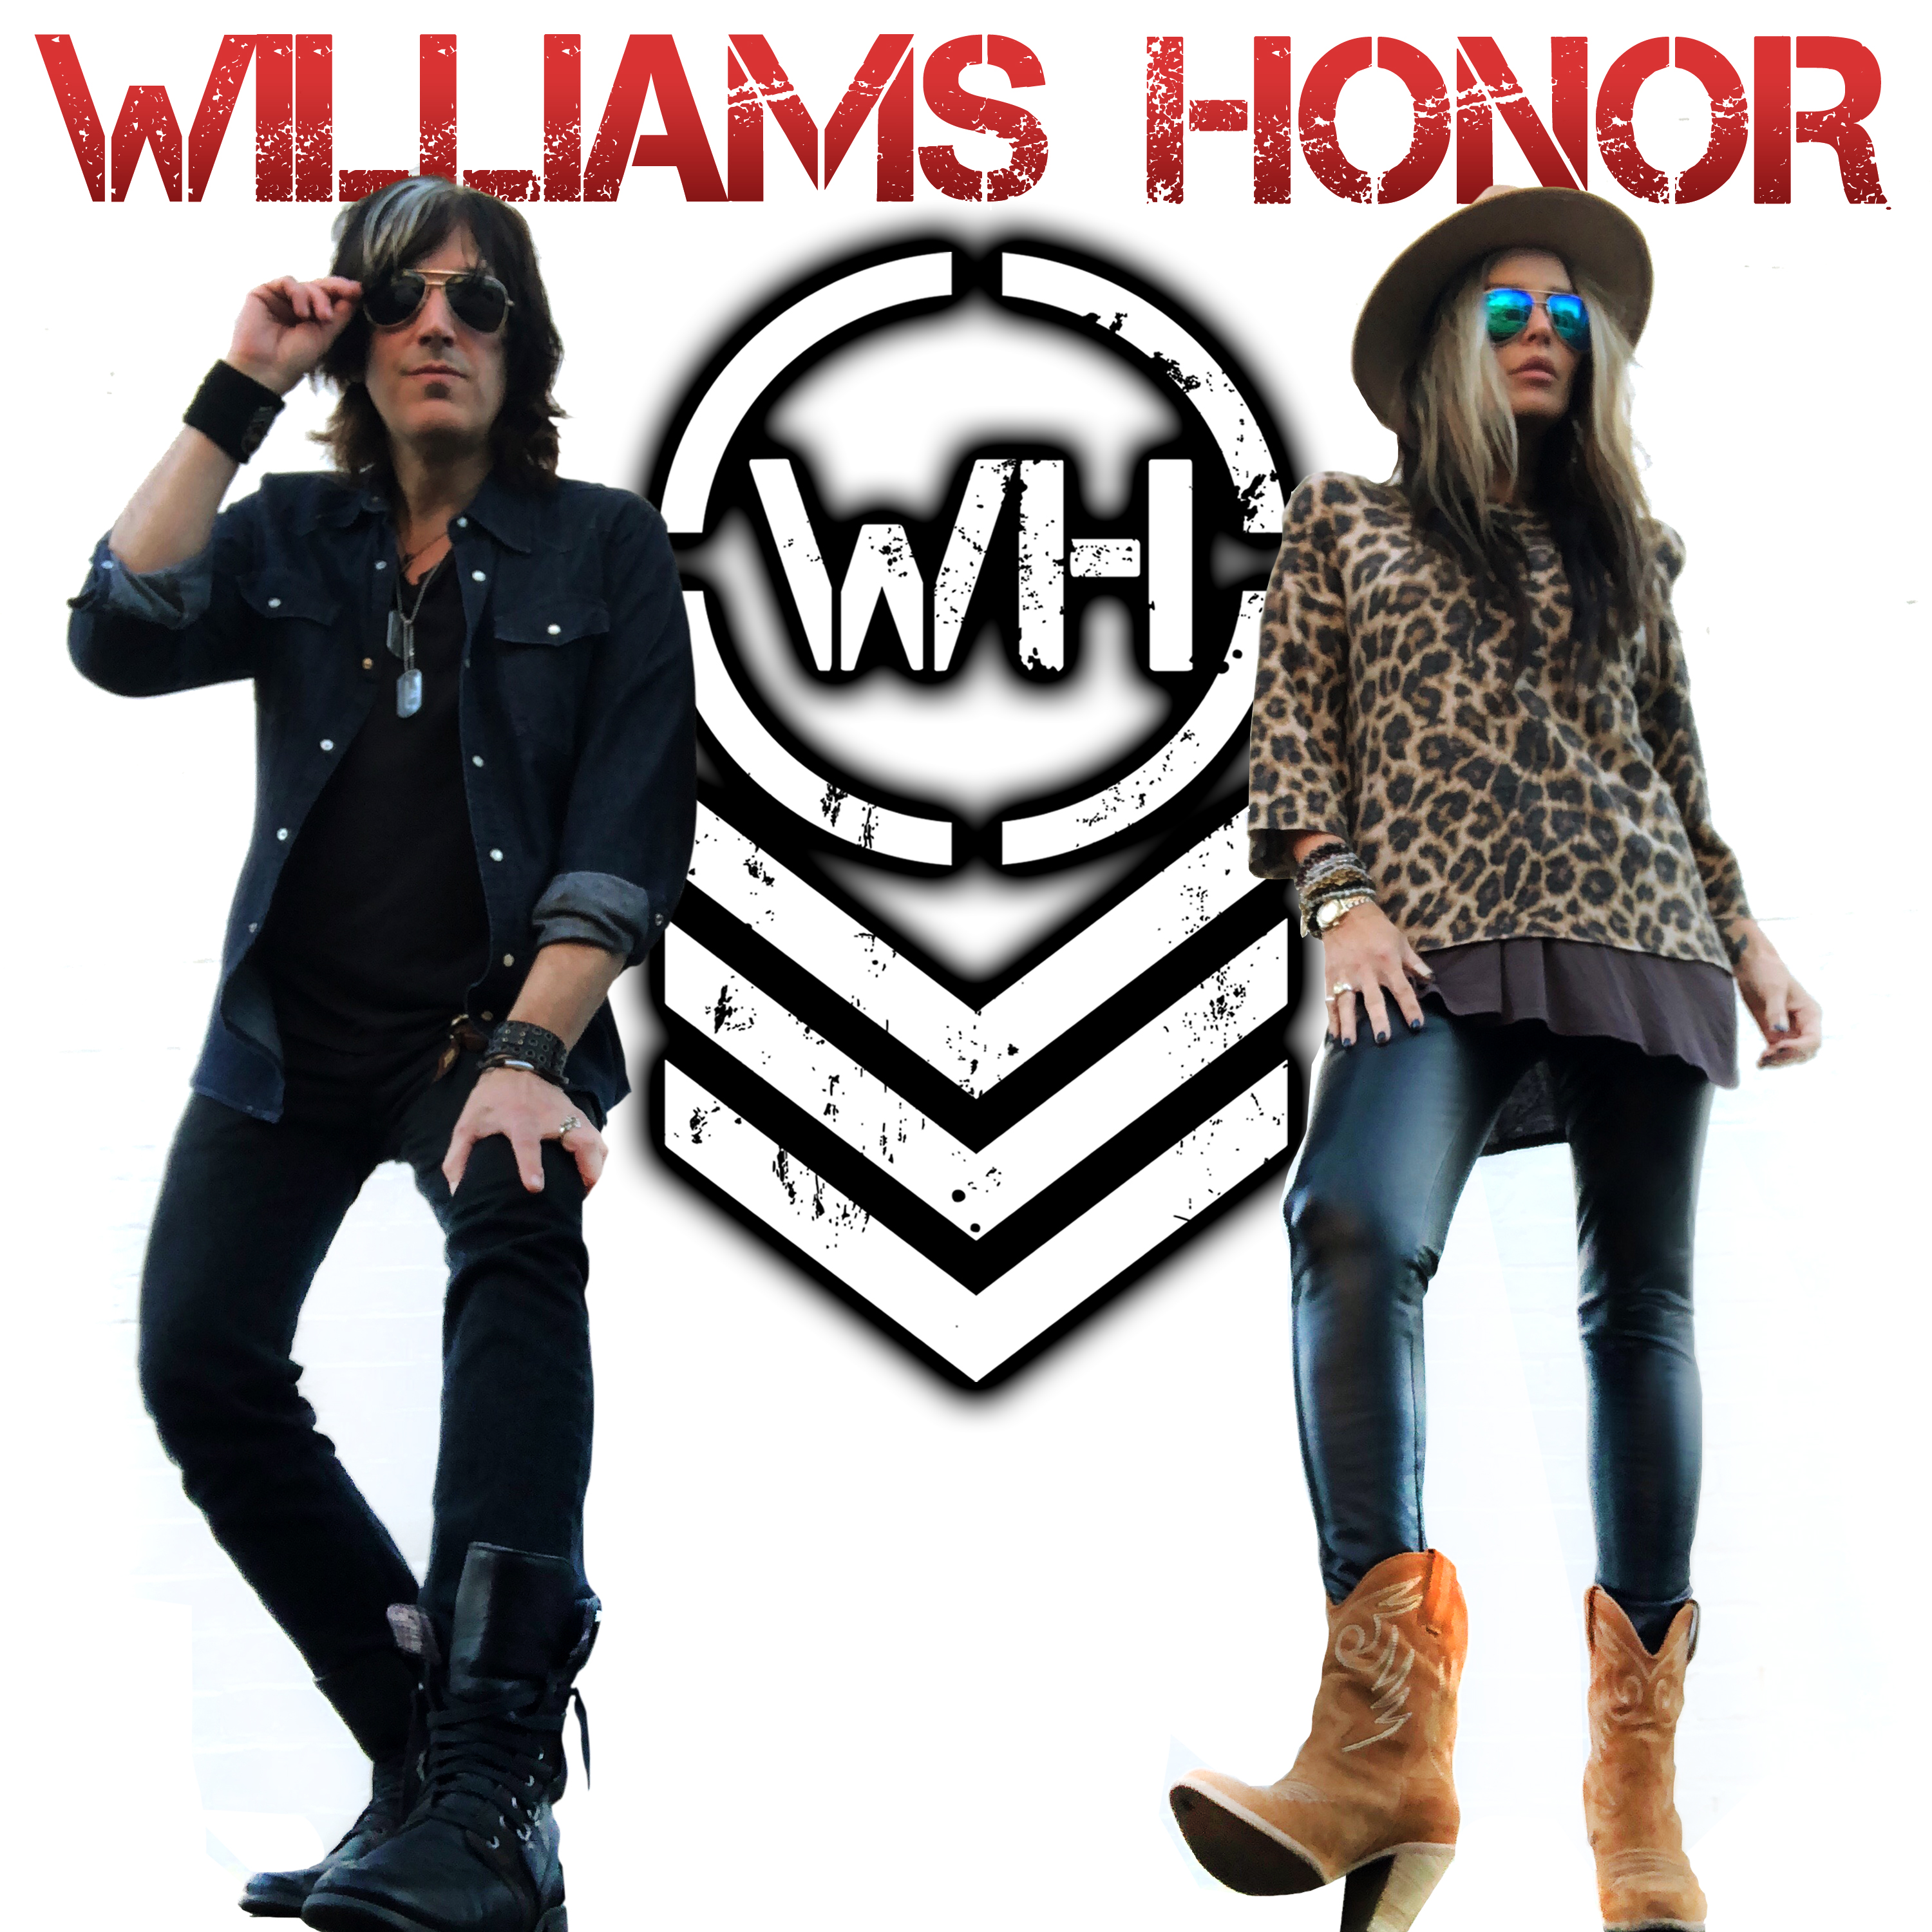 Special Appearance by Williams Honor